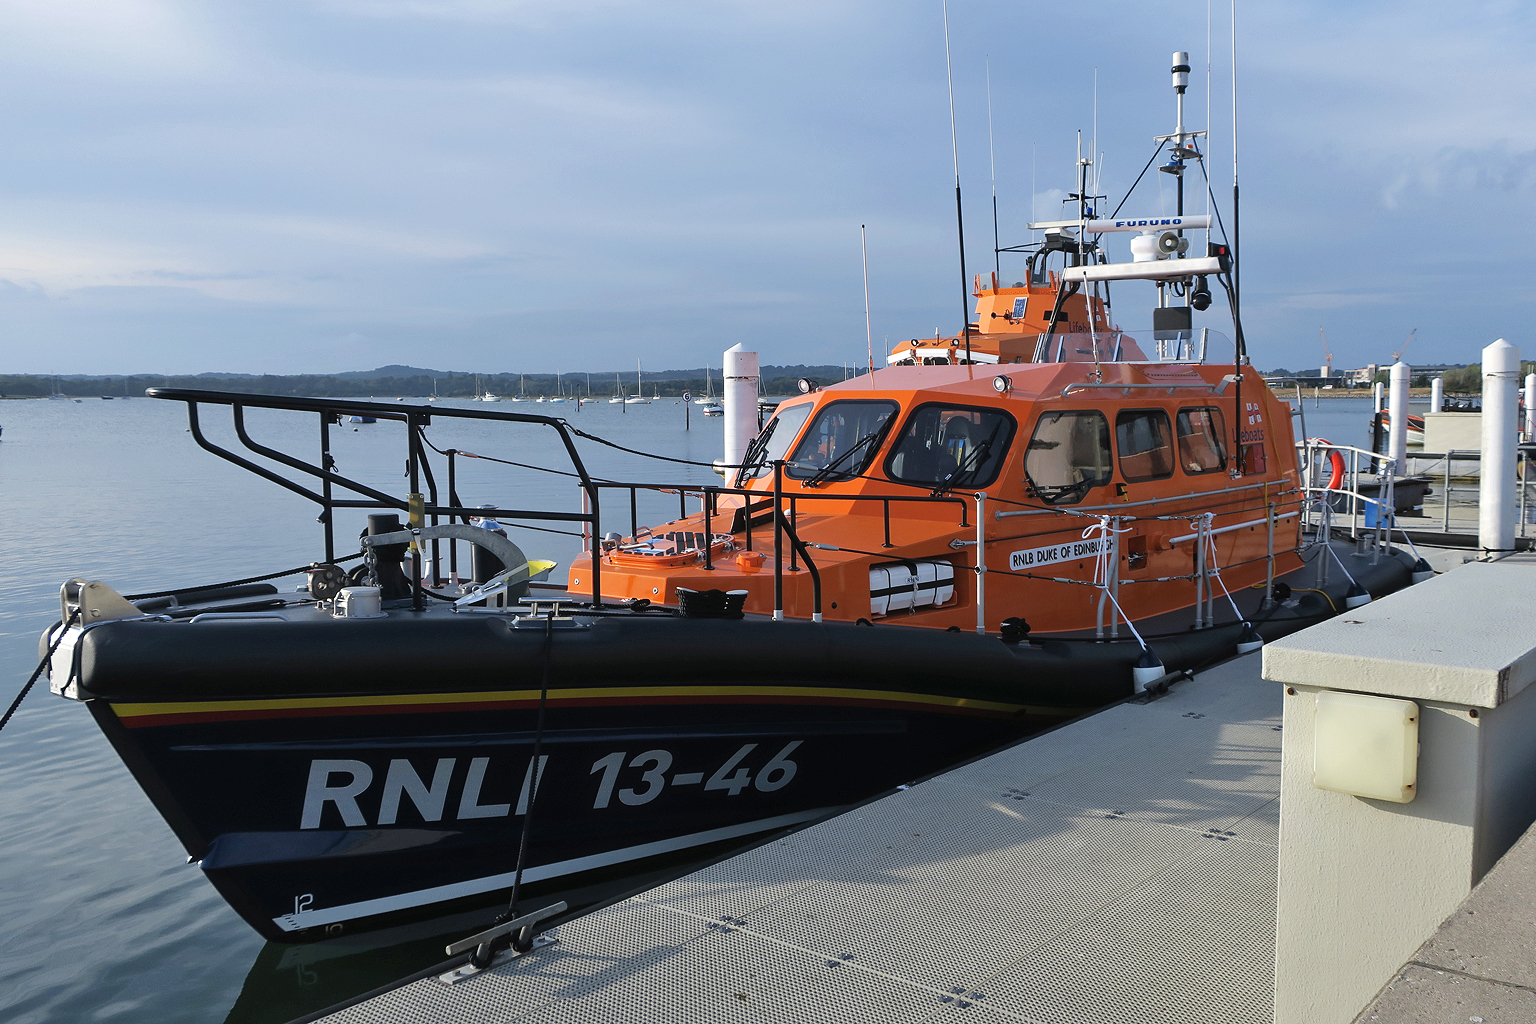 Alongside at the Lifeboat college